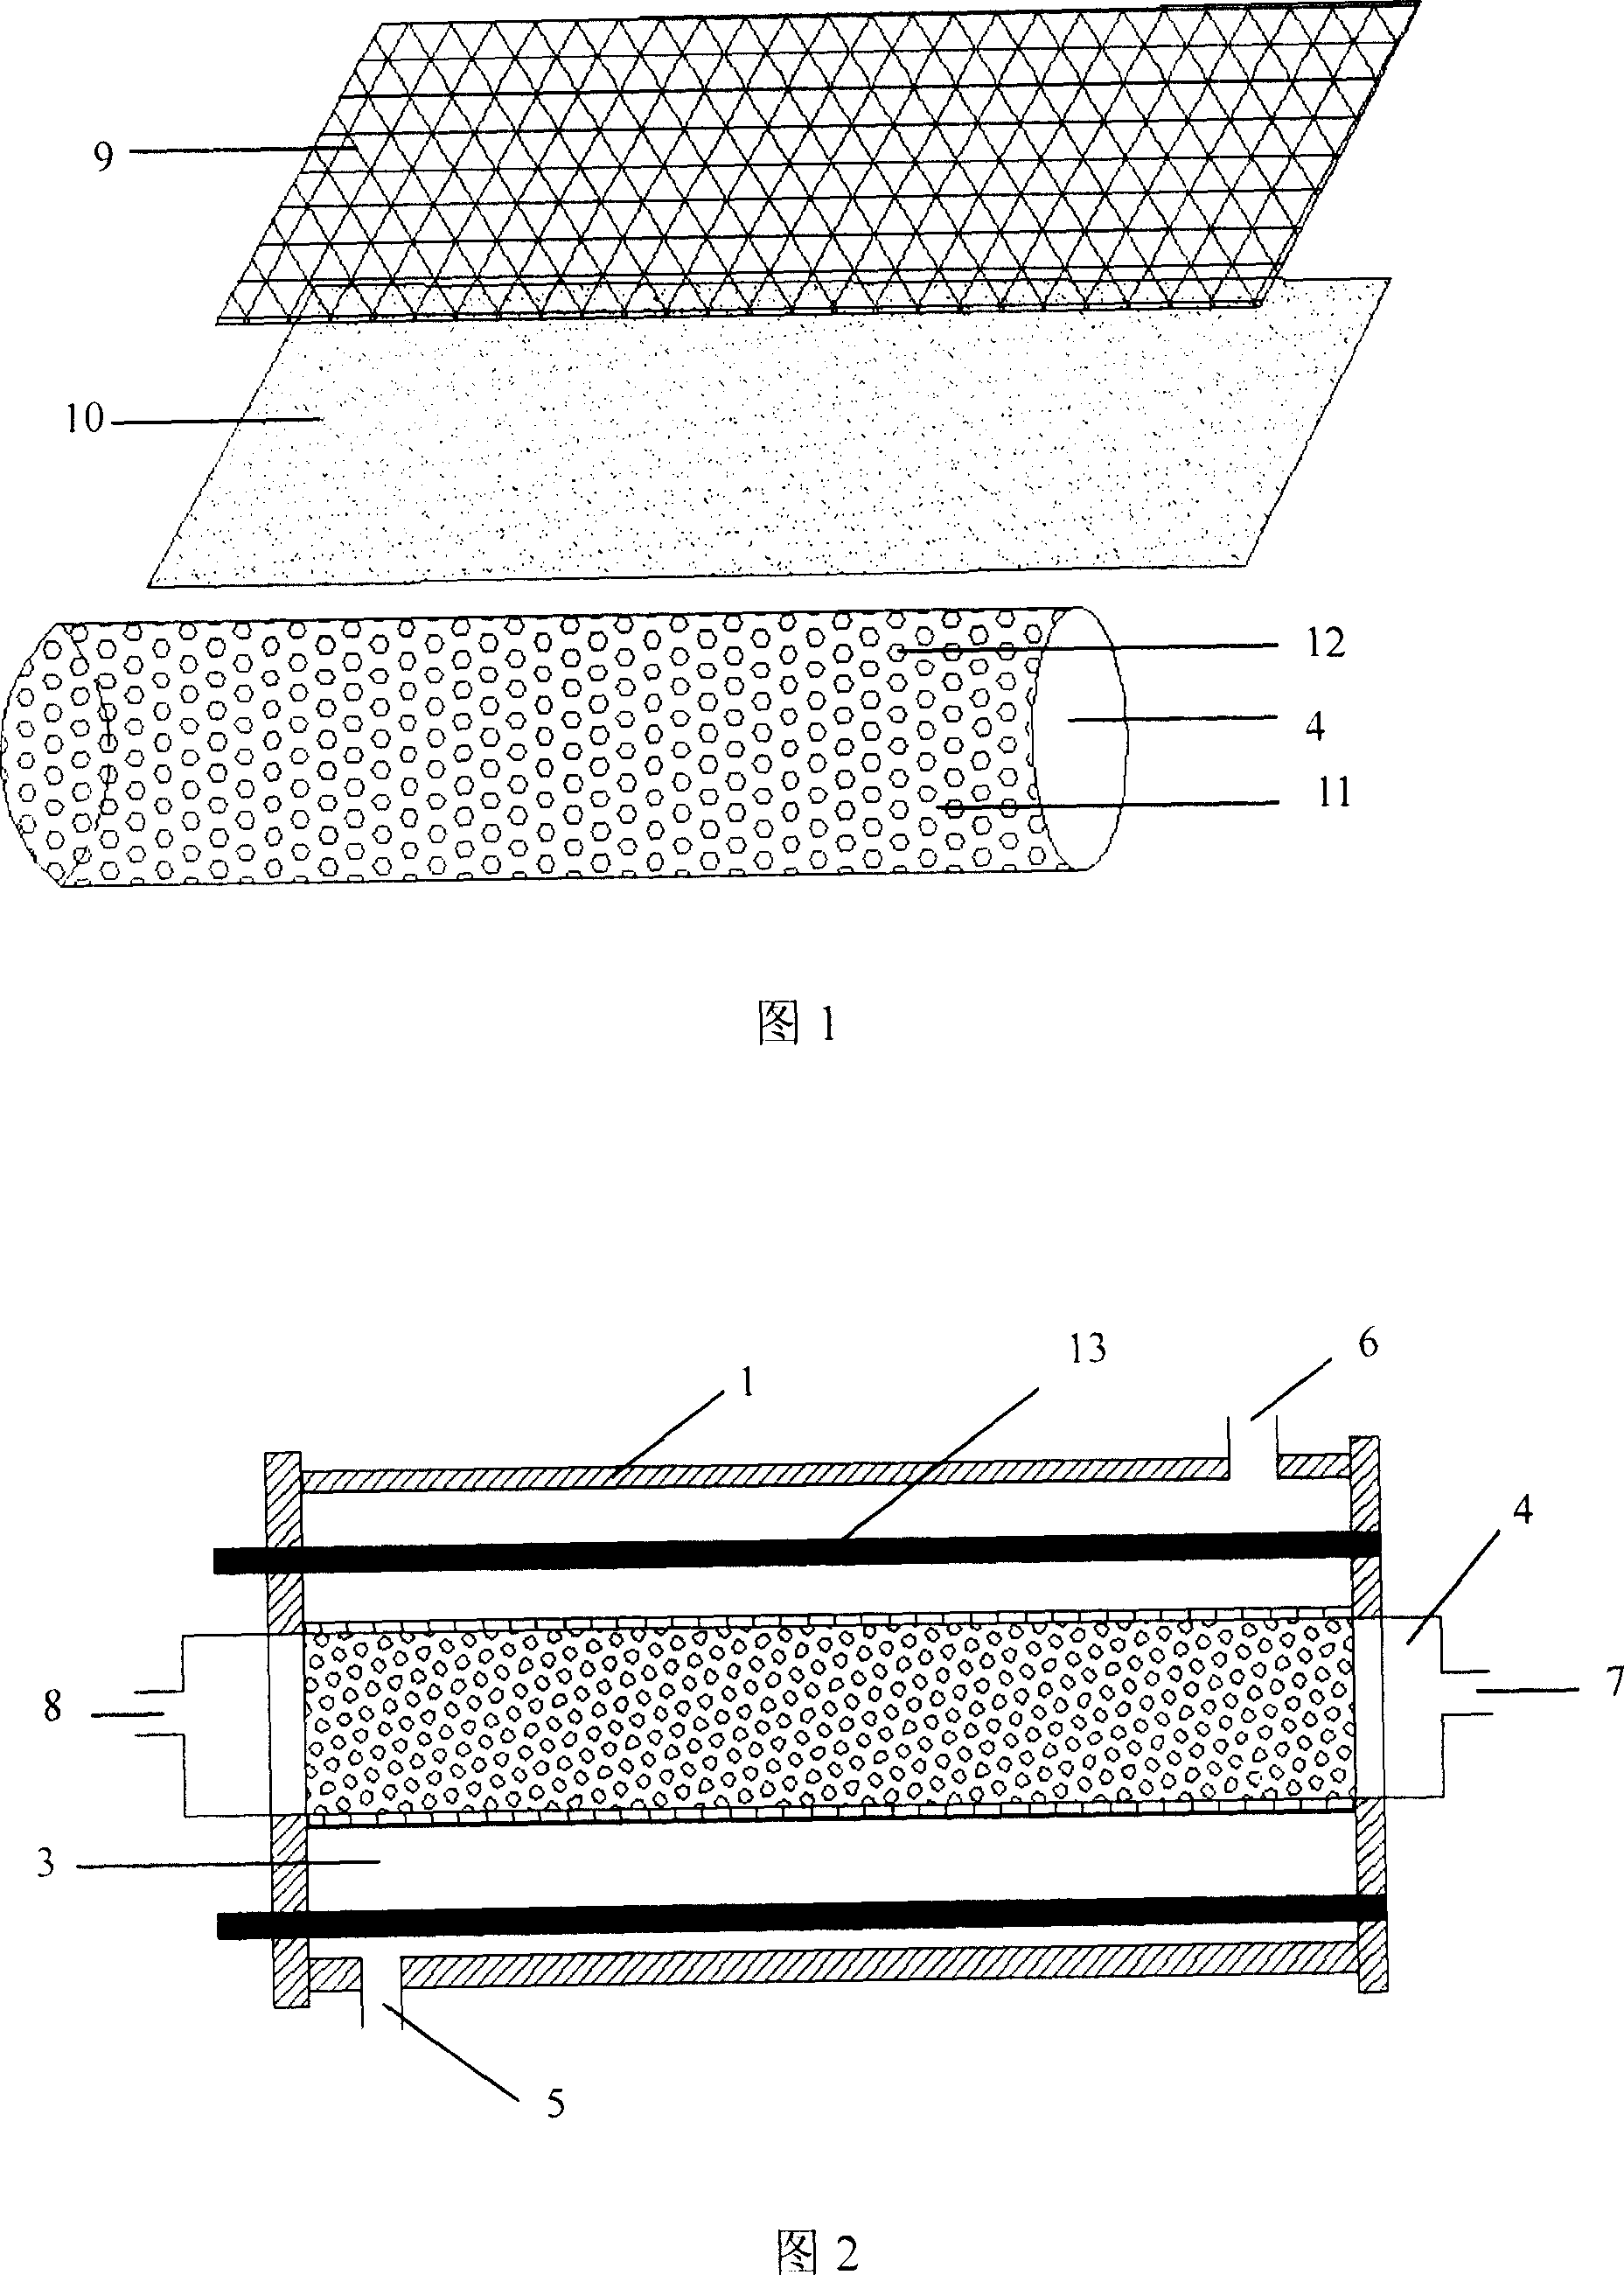 Microbiological fuel cell device and battery and use and water treatment system